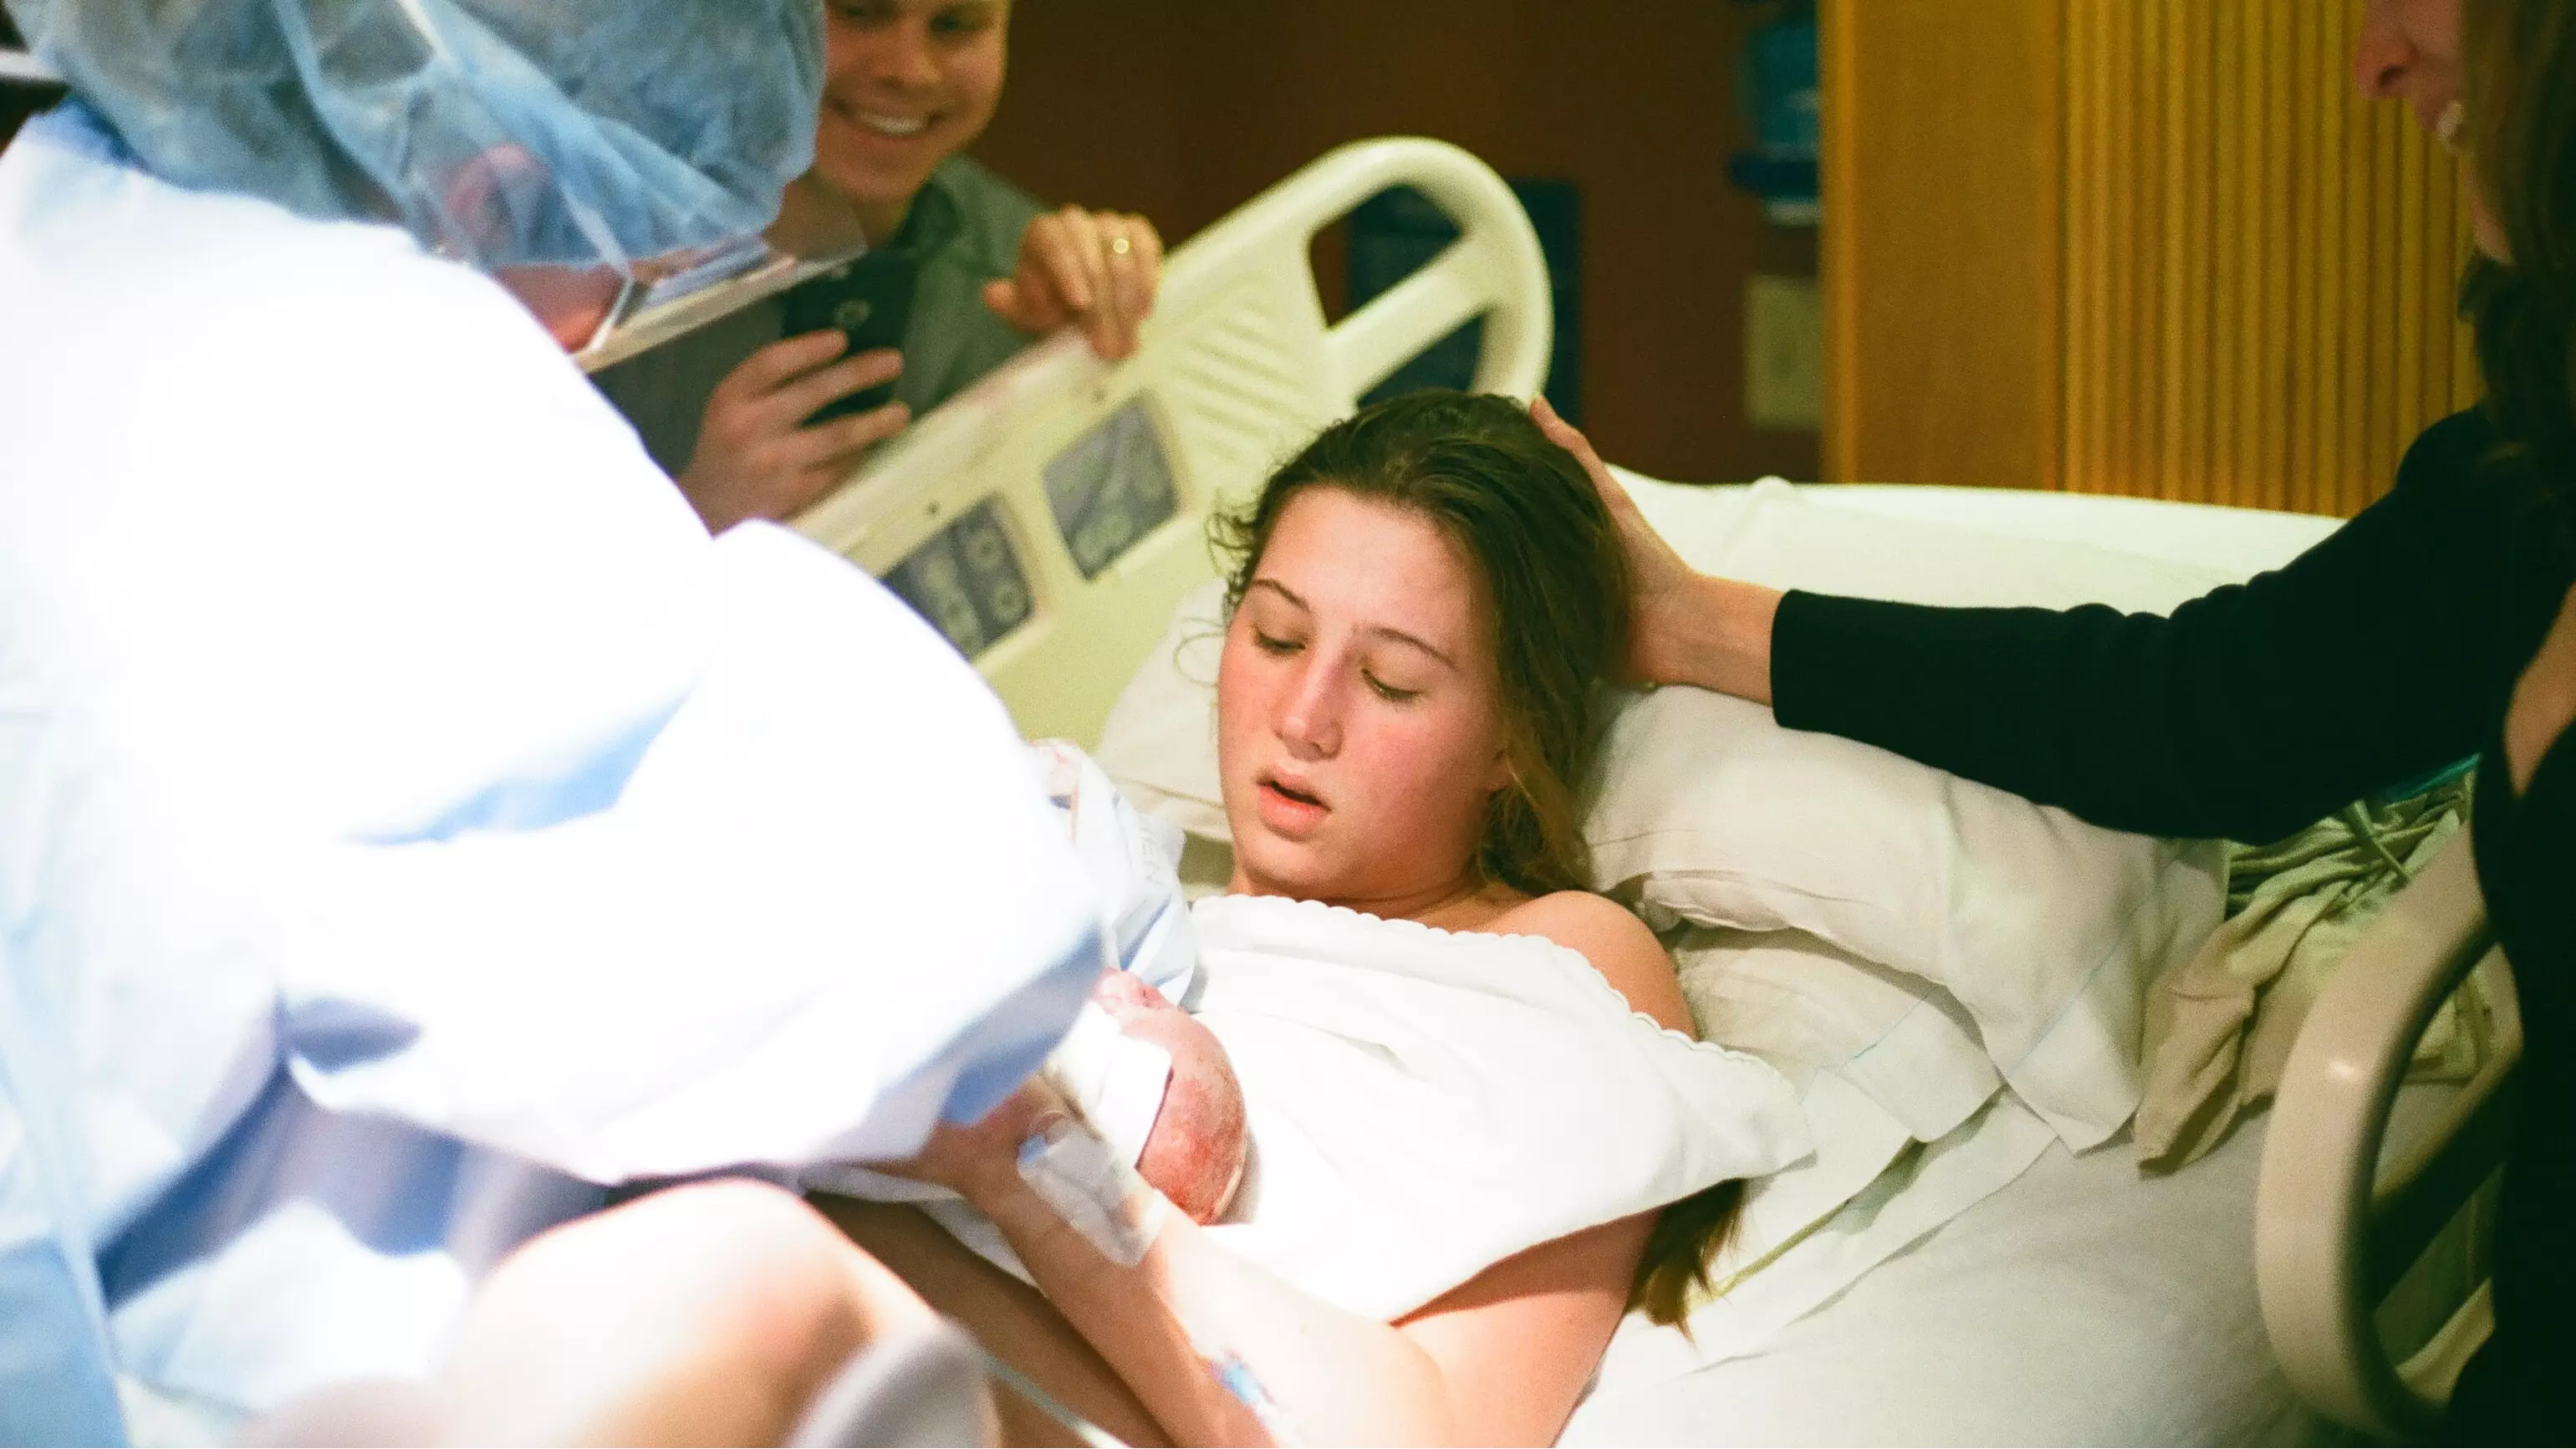 Incredible Image Shows Woman's Bones Moving While She Gives Birth